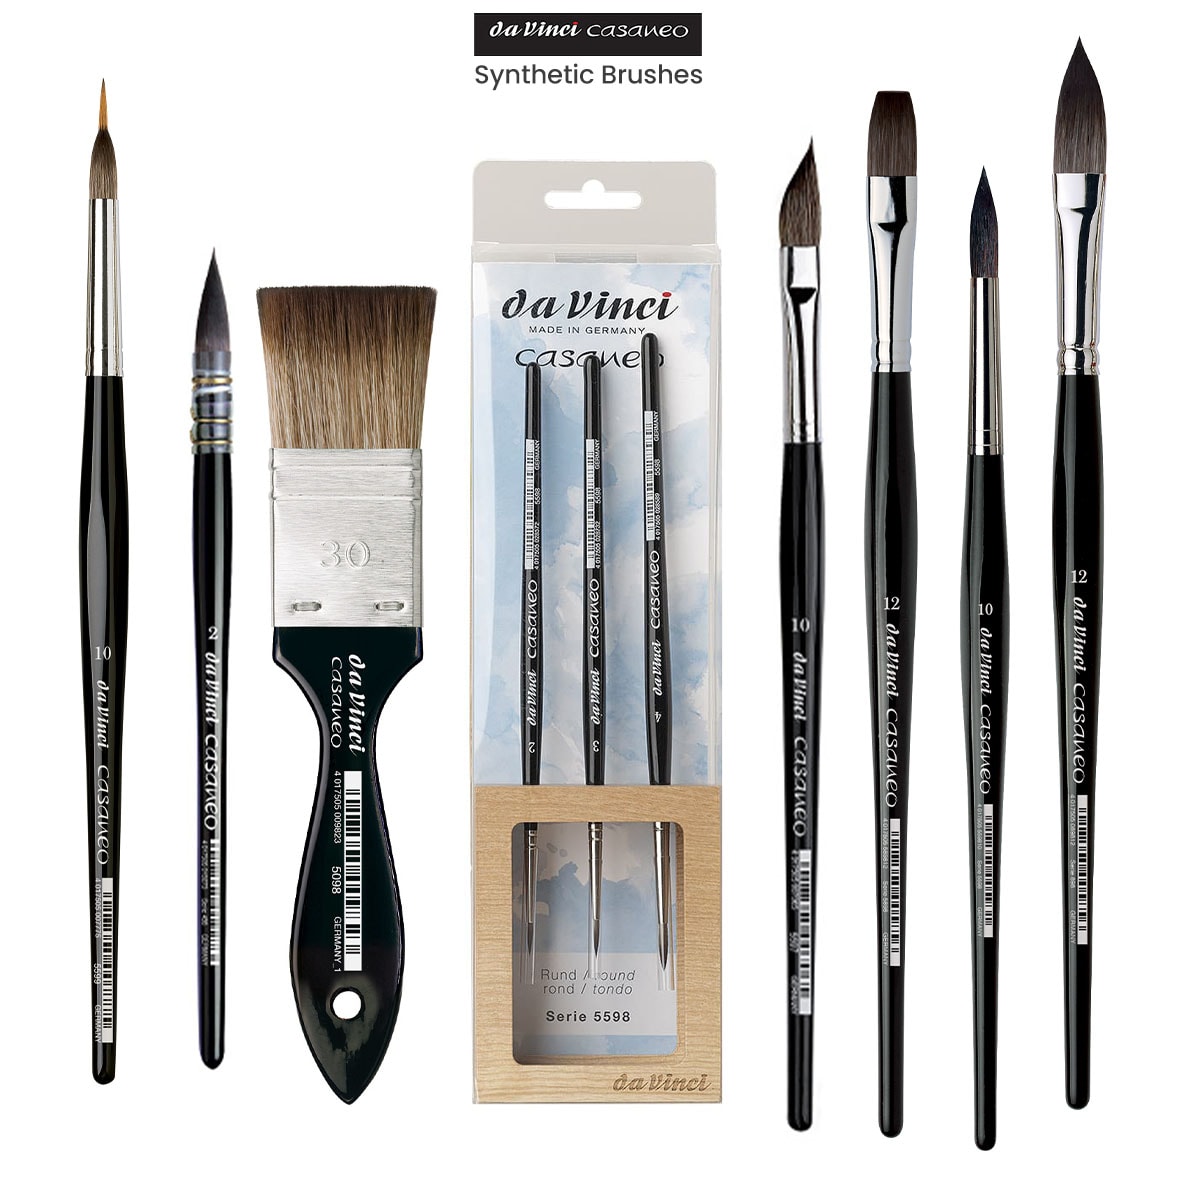 Jerry Q Art 24 Pcs Artist Paint Brush Set with Free Carry Pouch for Watercolor, Acrylic, Oil and All Media, Suitable for Canv